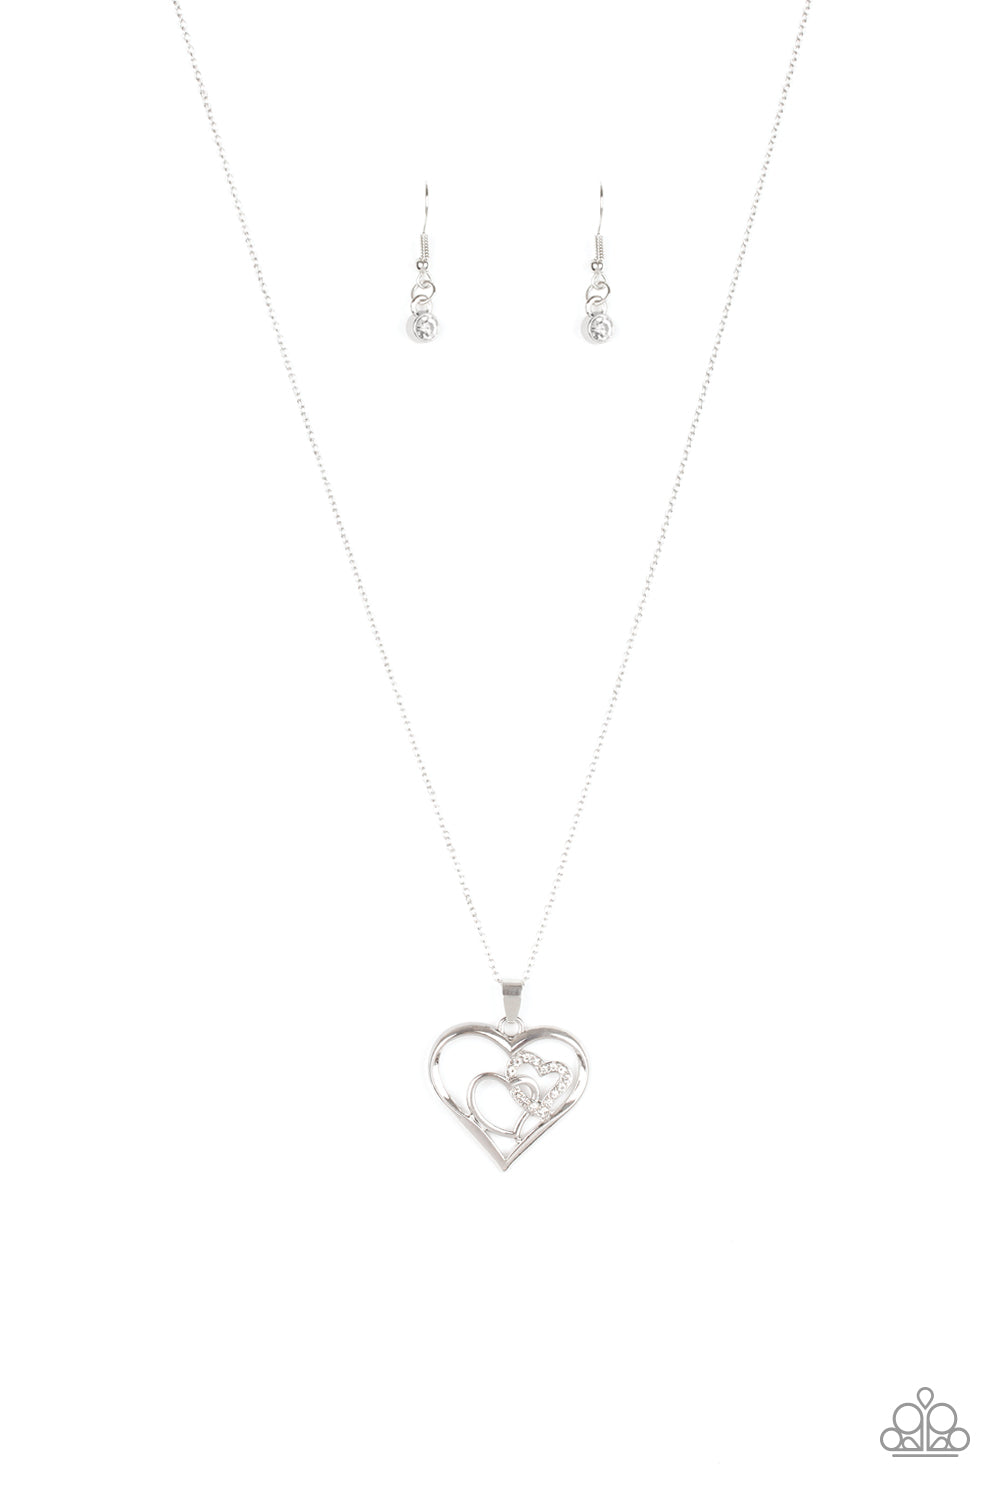 Cupid Charm White Necklace - Paparazzi Accessories  A white rhinestone encrusted heart intertwines with a plain silver heart inside of a larger silver heart frame, creating a romantic pendant at the bottom of a shimmery silver chain. Features an adjustable clasp closure.  All Paparazzi Accessories are lead free and nickel free!   Sold as one individual necklace. Includes one pair of matching earrings.